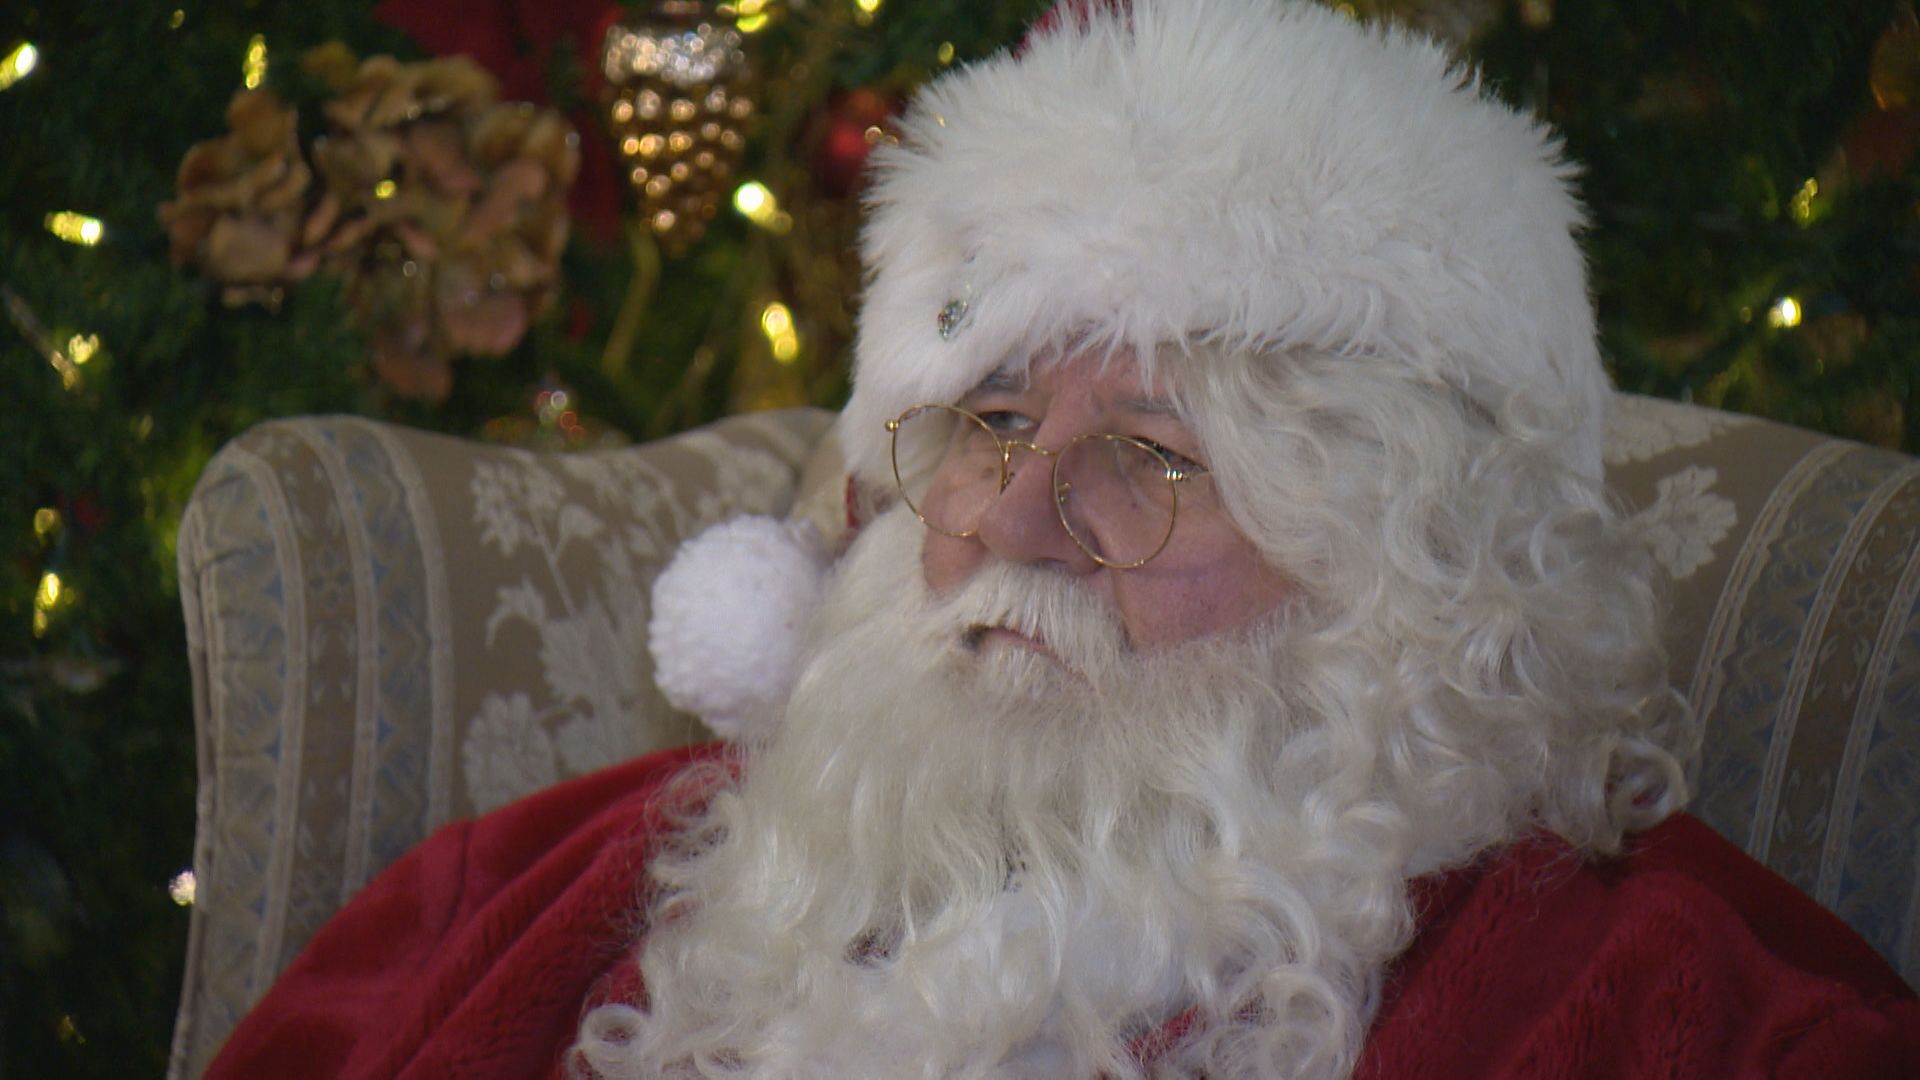 Silent Santa event gives kids with autism a chance to celebrate the holidays